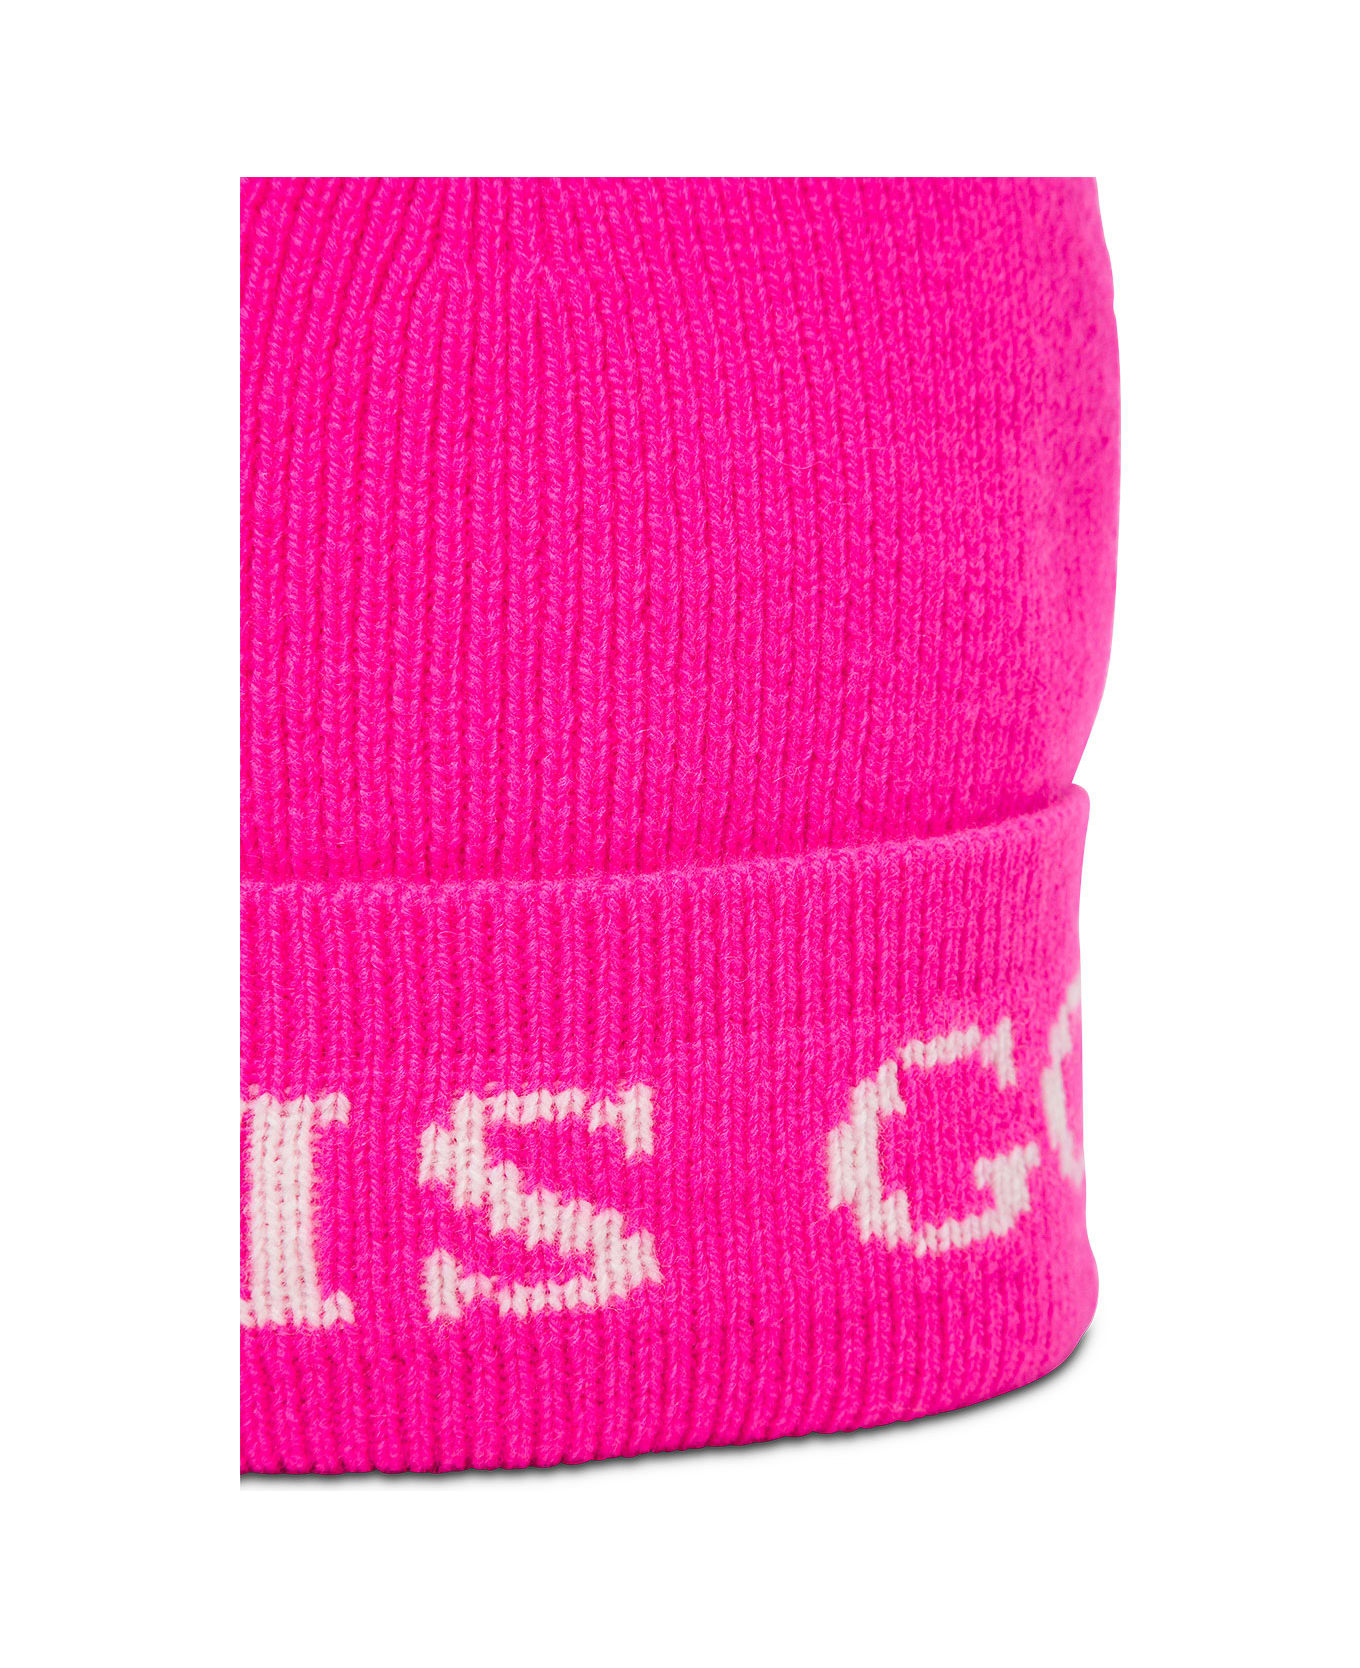 IRENEISGOOD Pink Wool And Cashmere protection Hat With Logo - Fucsia